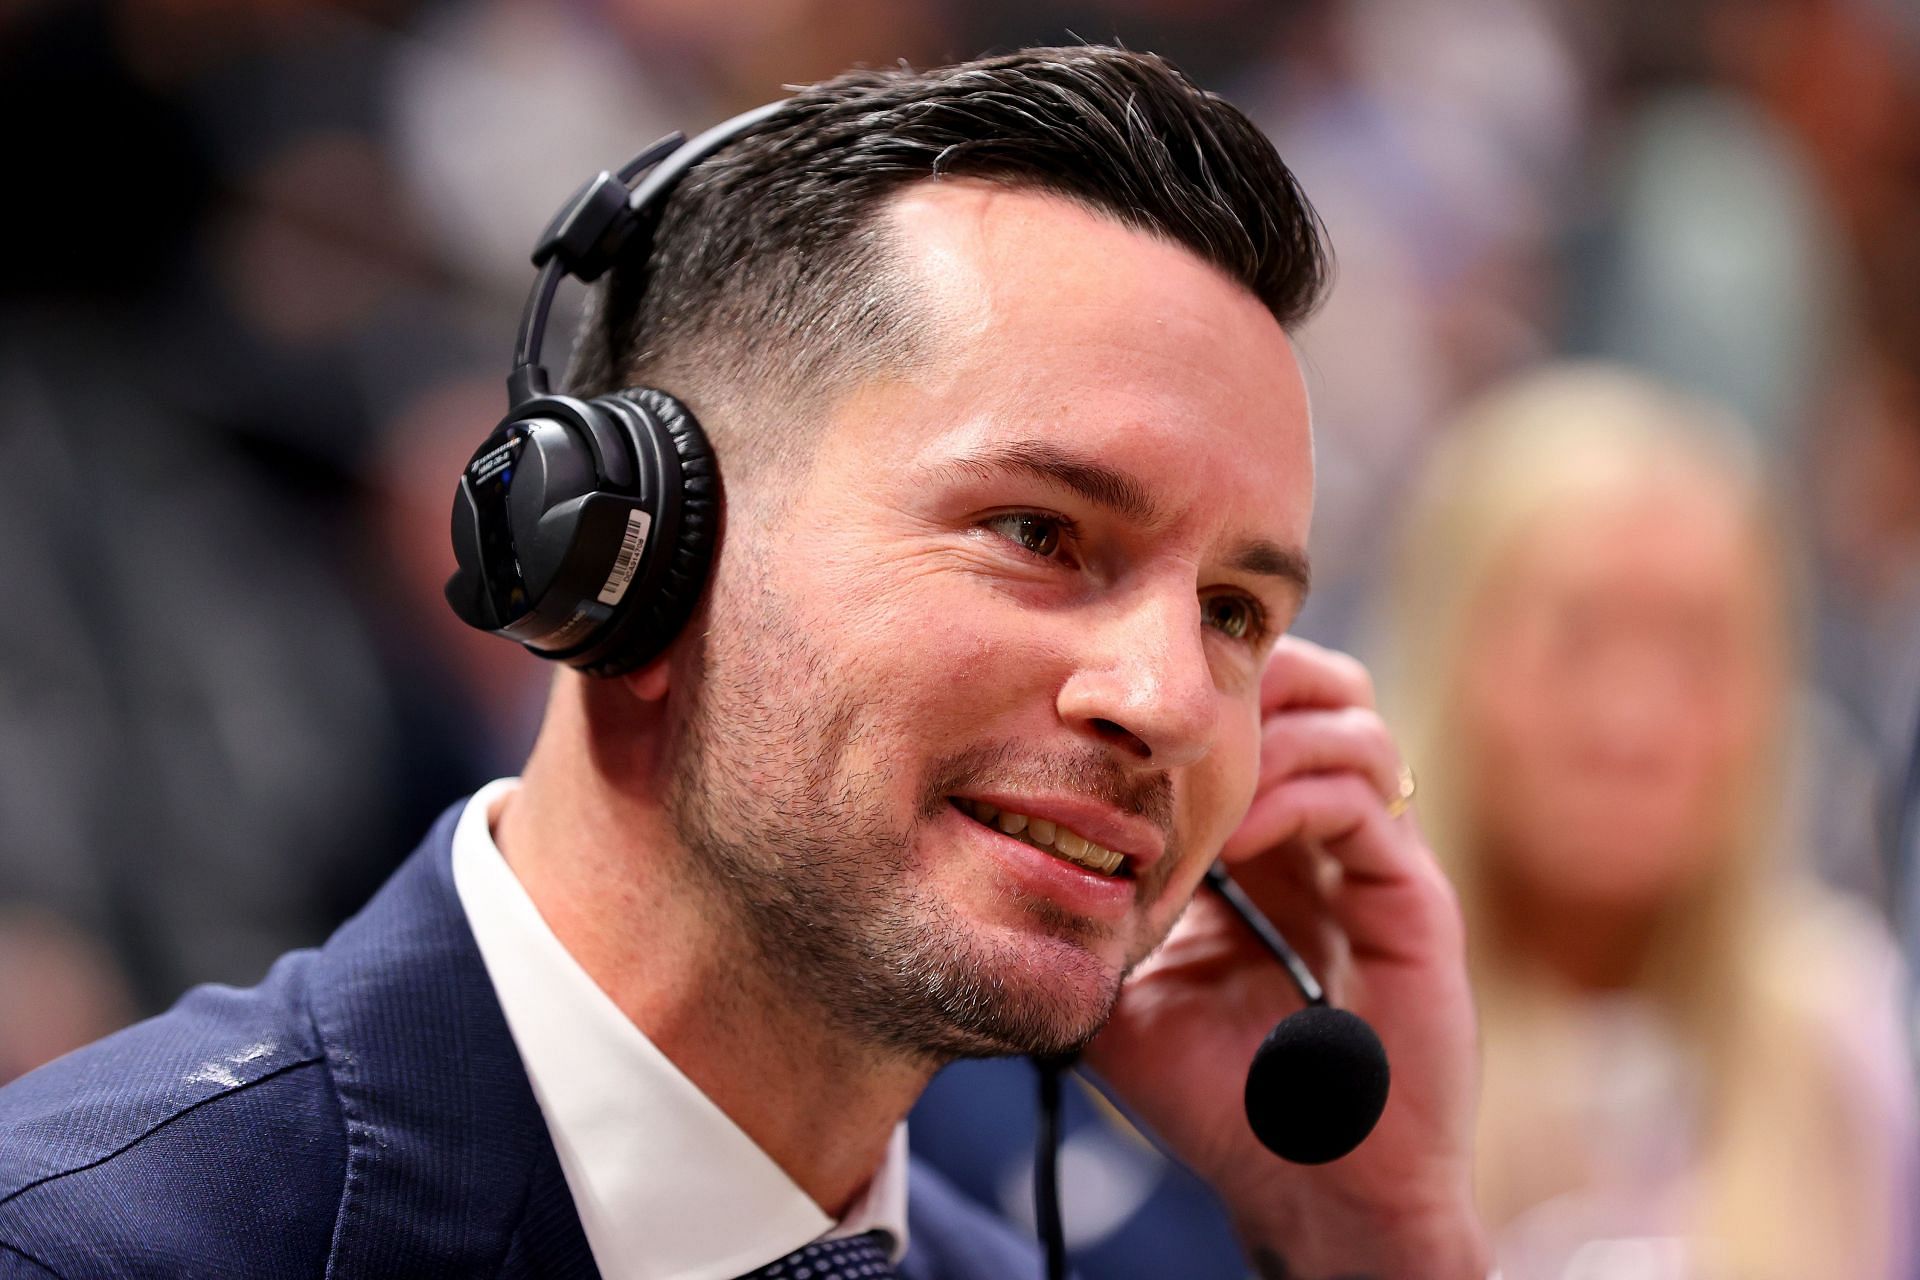 JJ Redick advised students of the game to not teach the art of shooting in his style